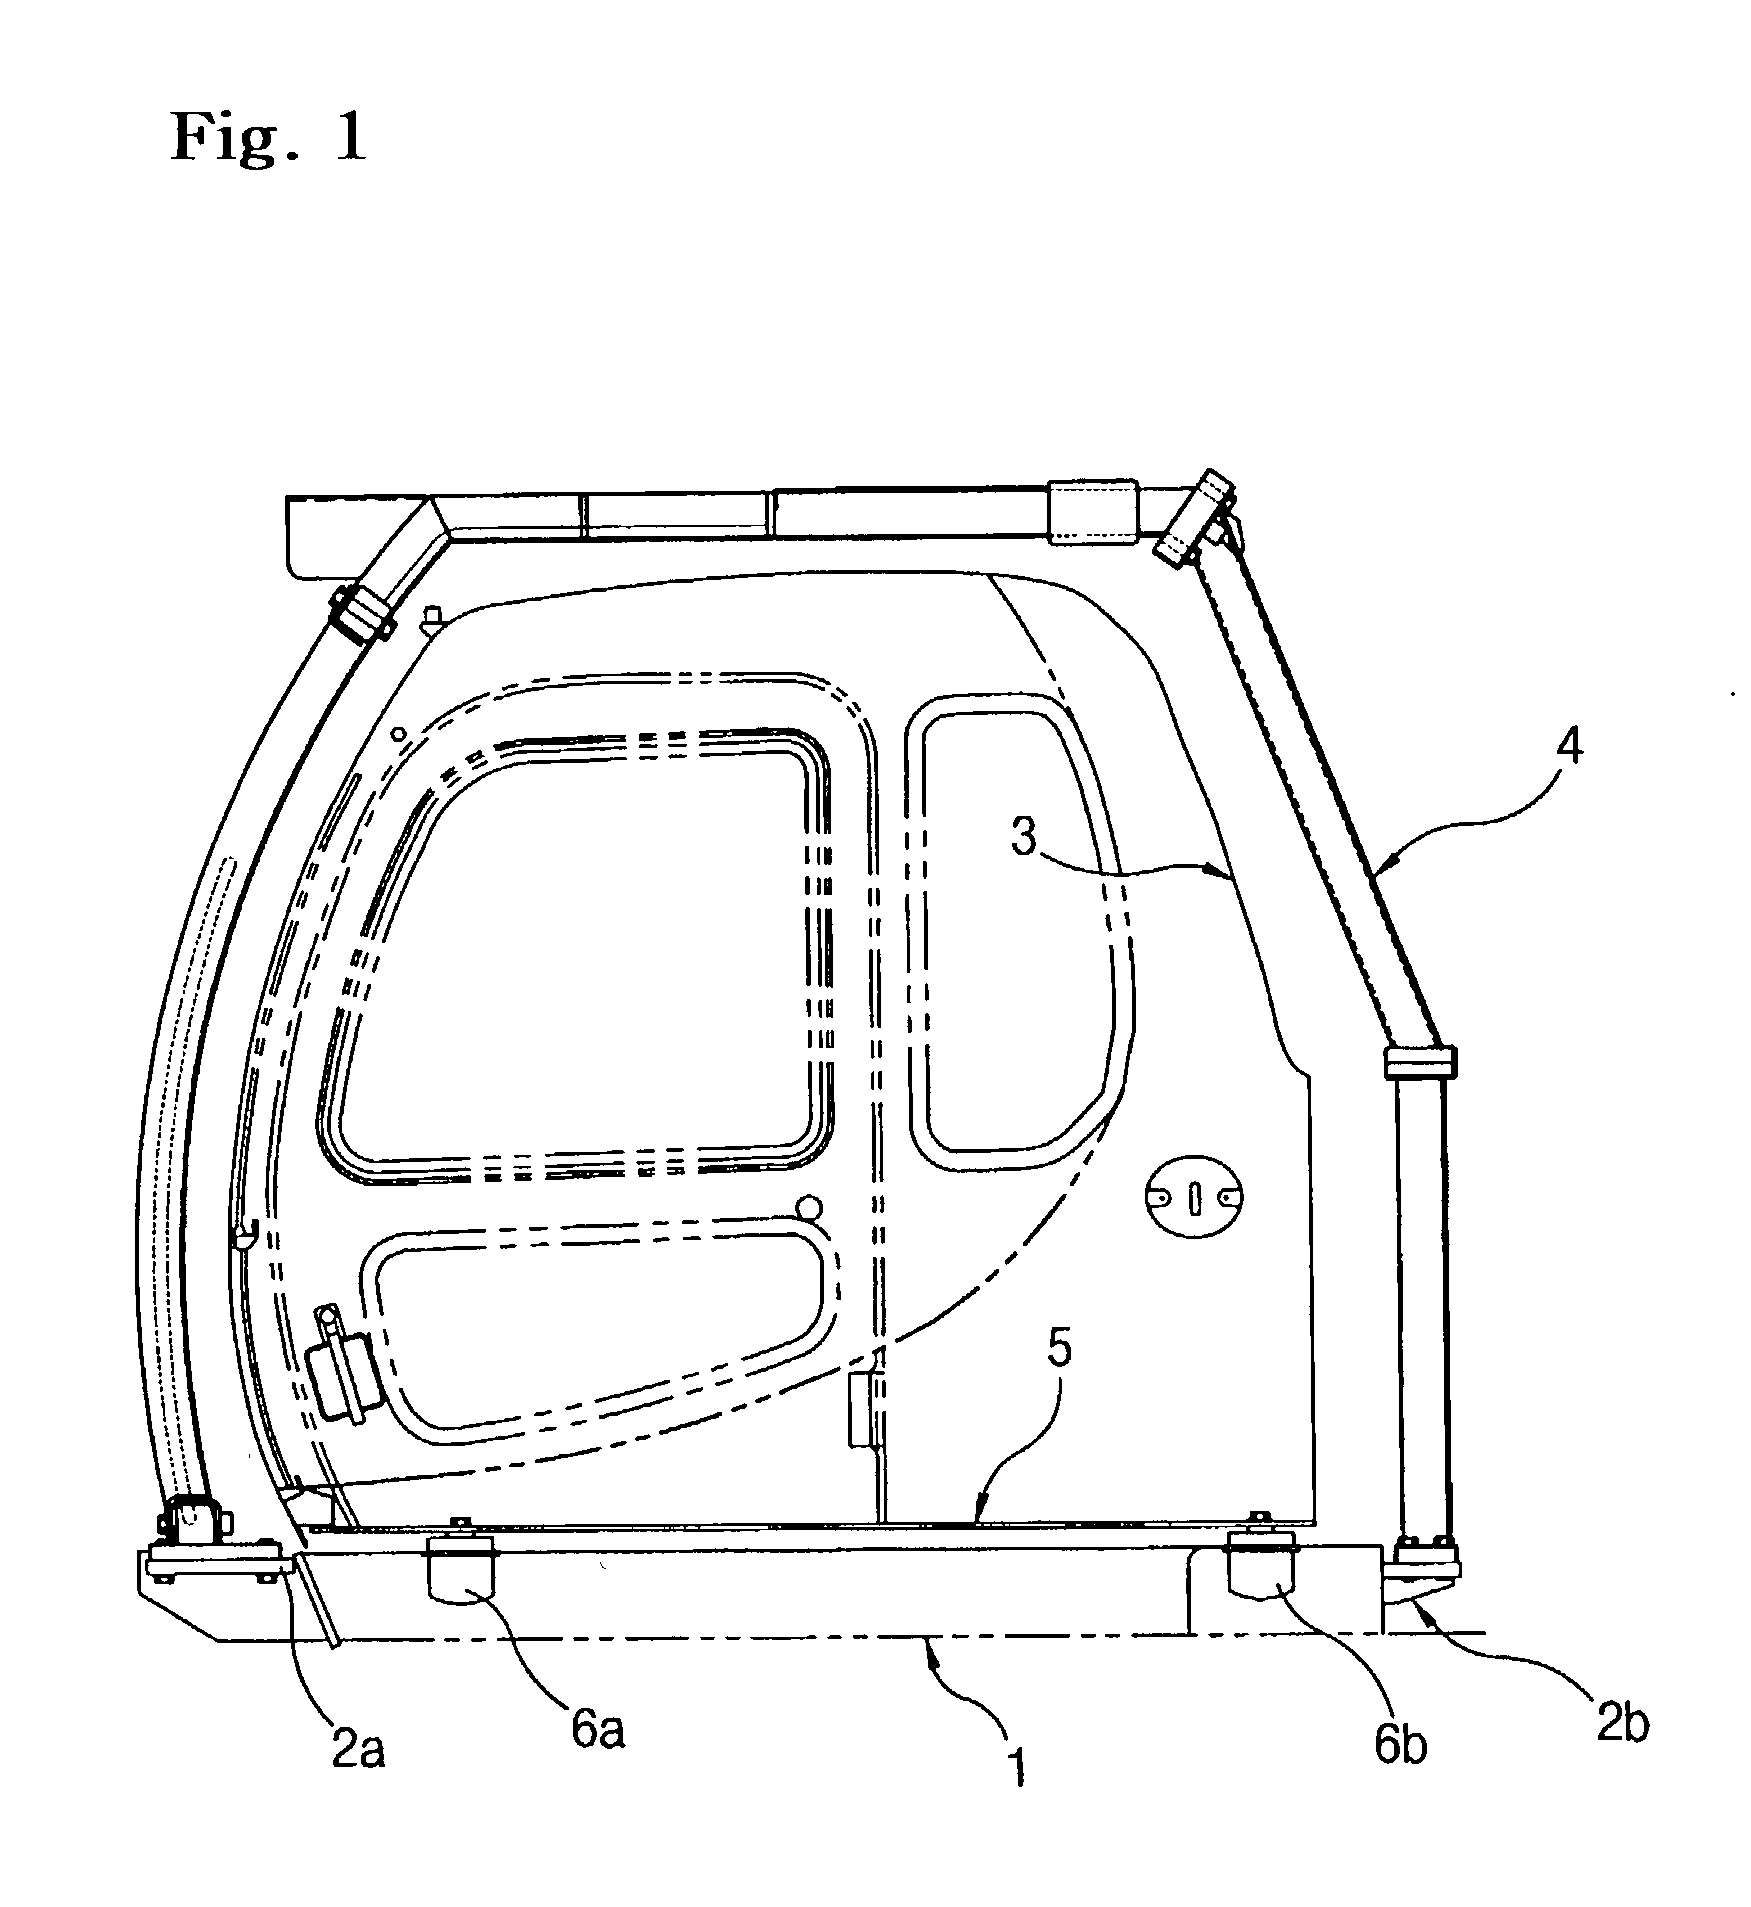 Driver protection structure and a device supporting the same